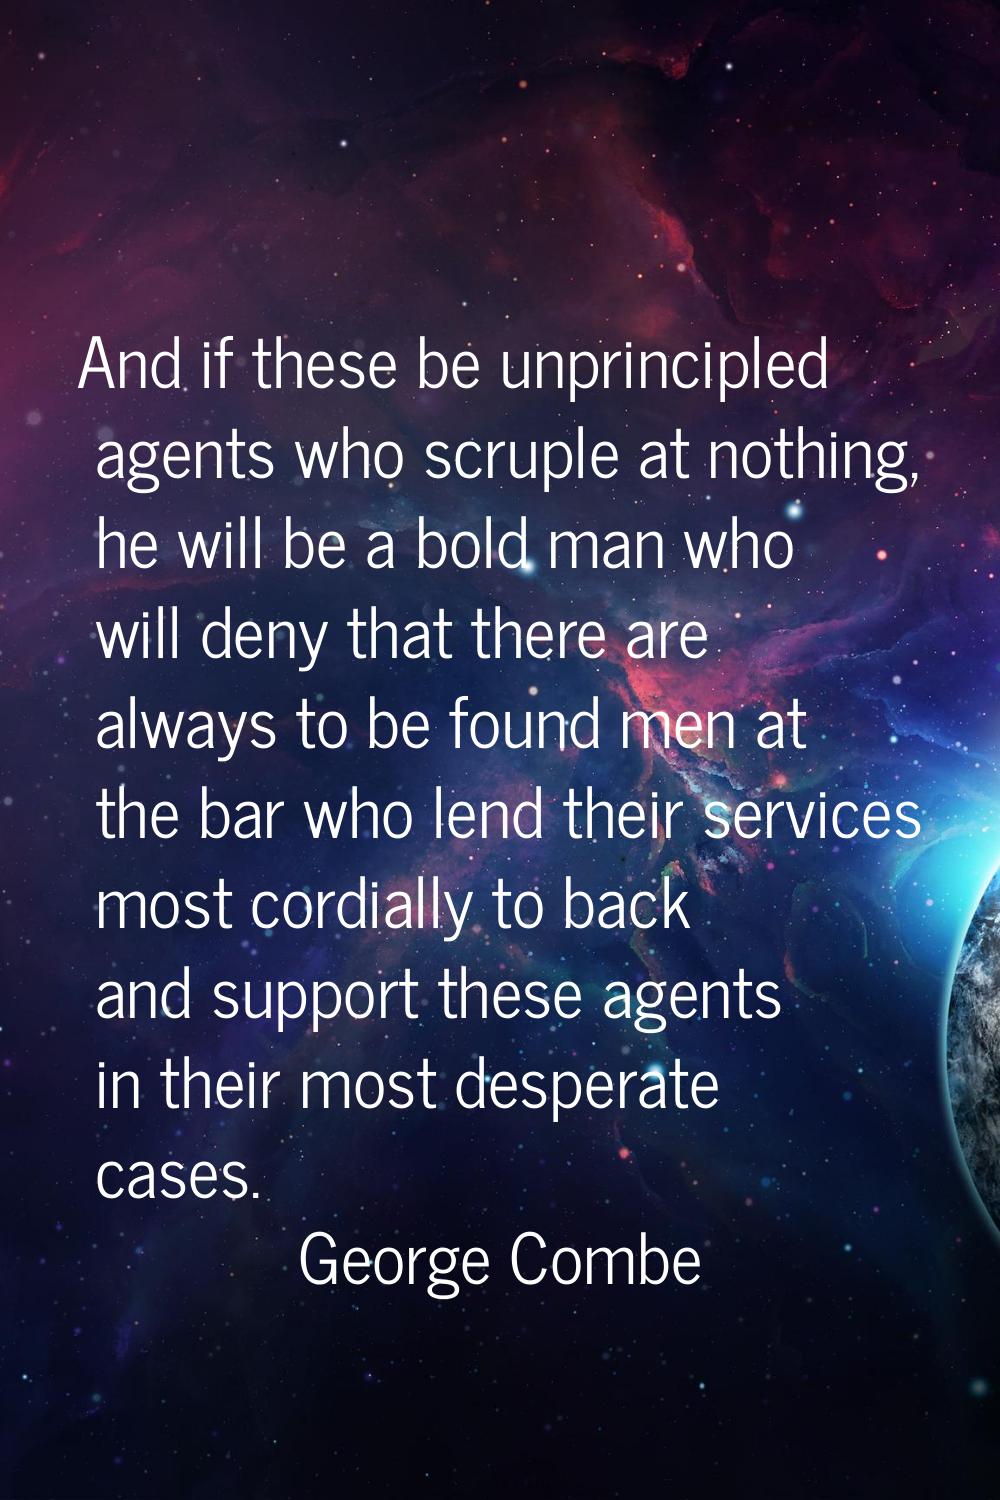 And if these be unprincipled agents who scruple at nothing, he will be a bold man who will deny tha